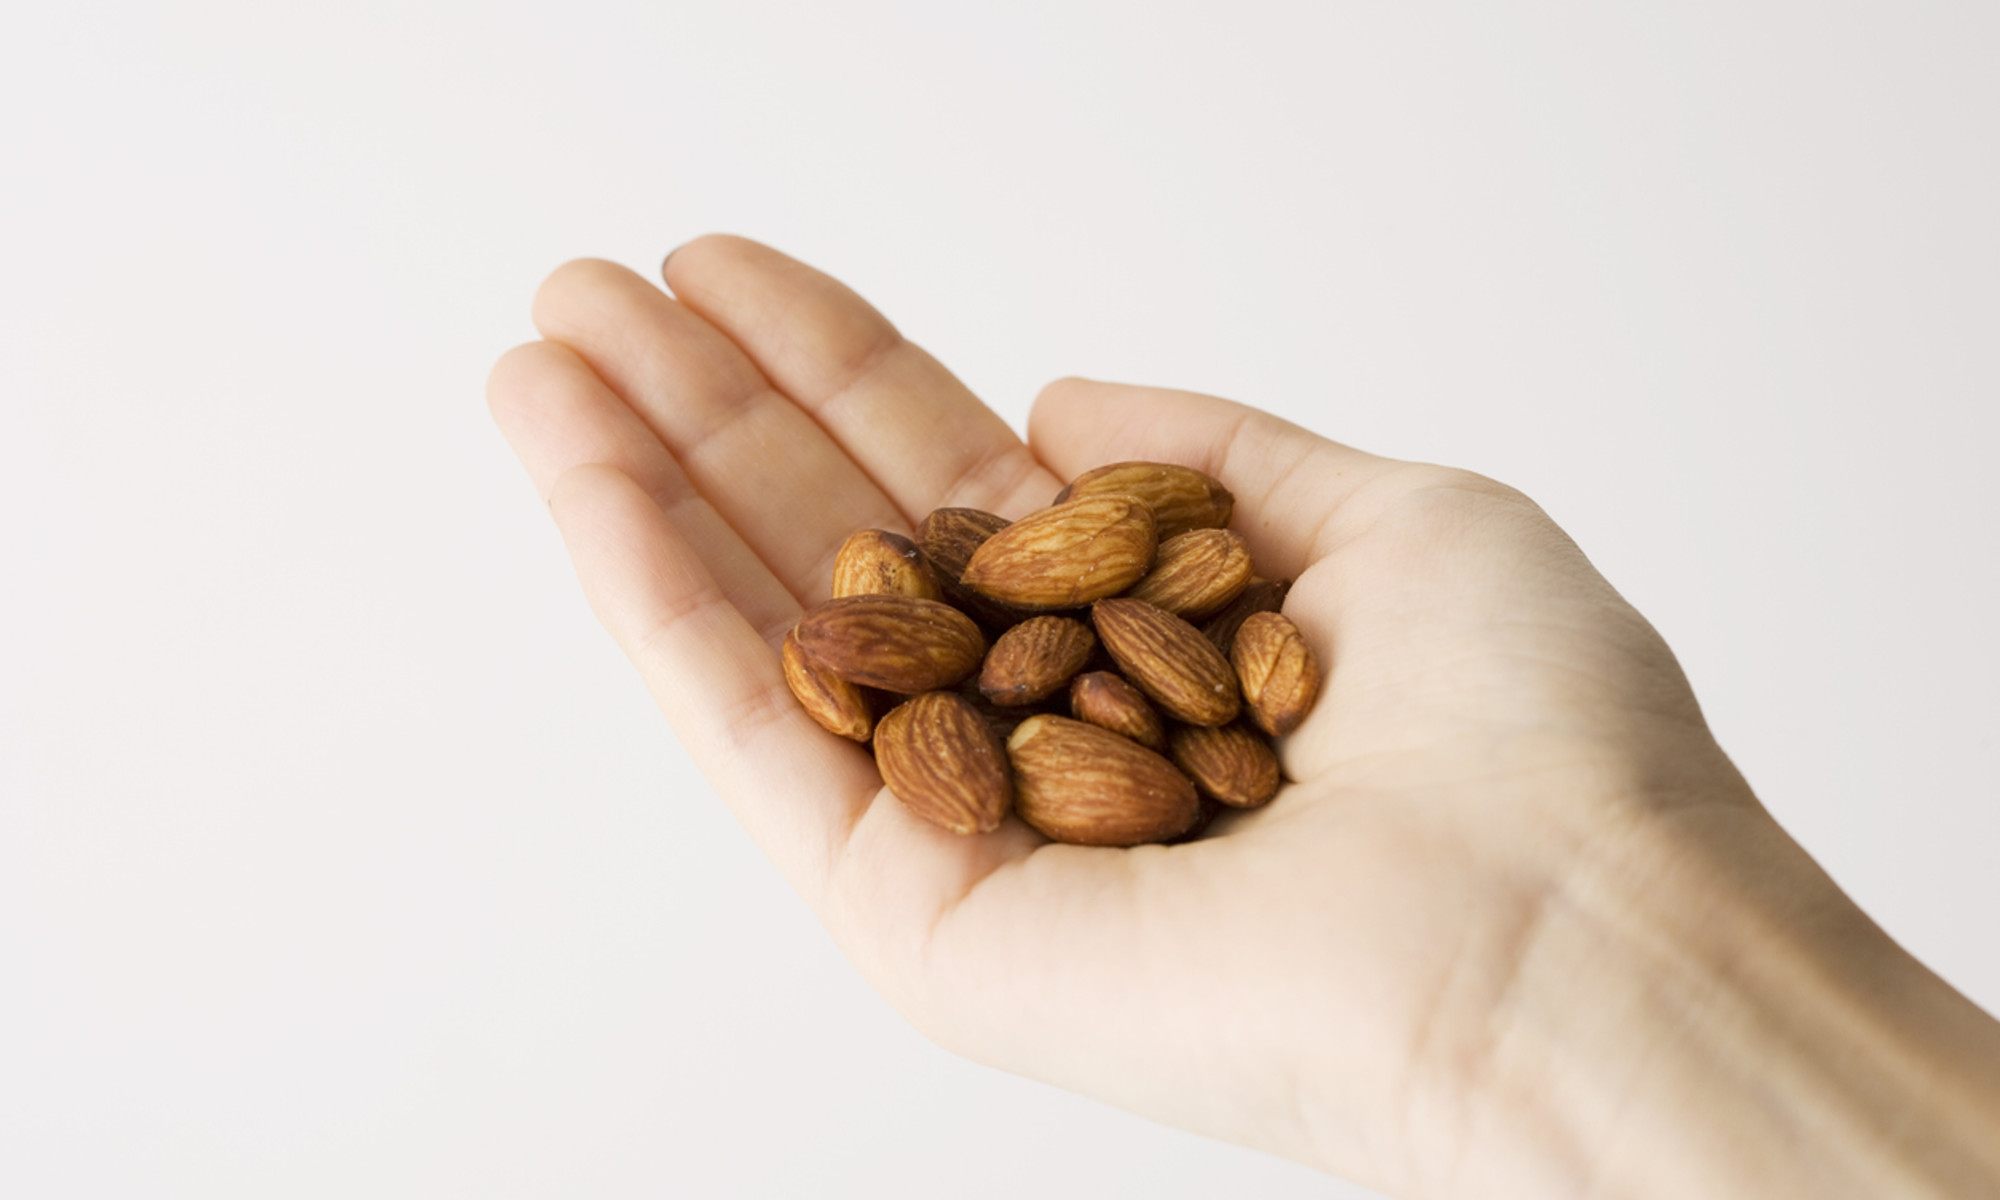 Eat A Handful Of This Nut Daily For Weight Loss, Gut Health & More